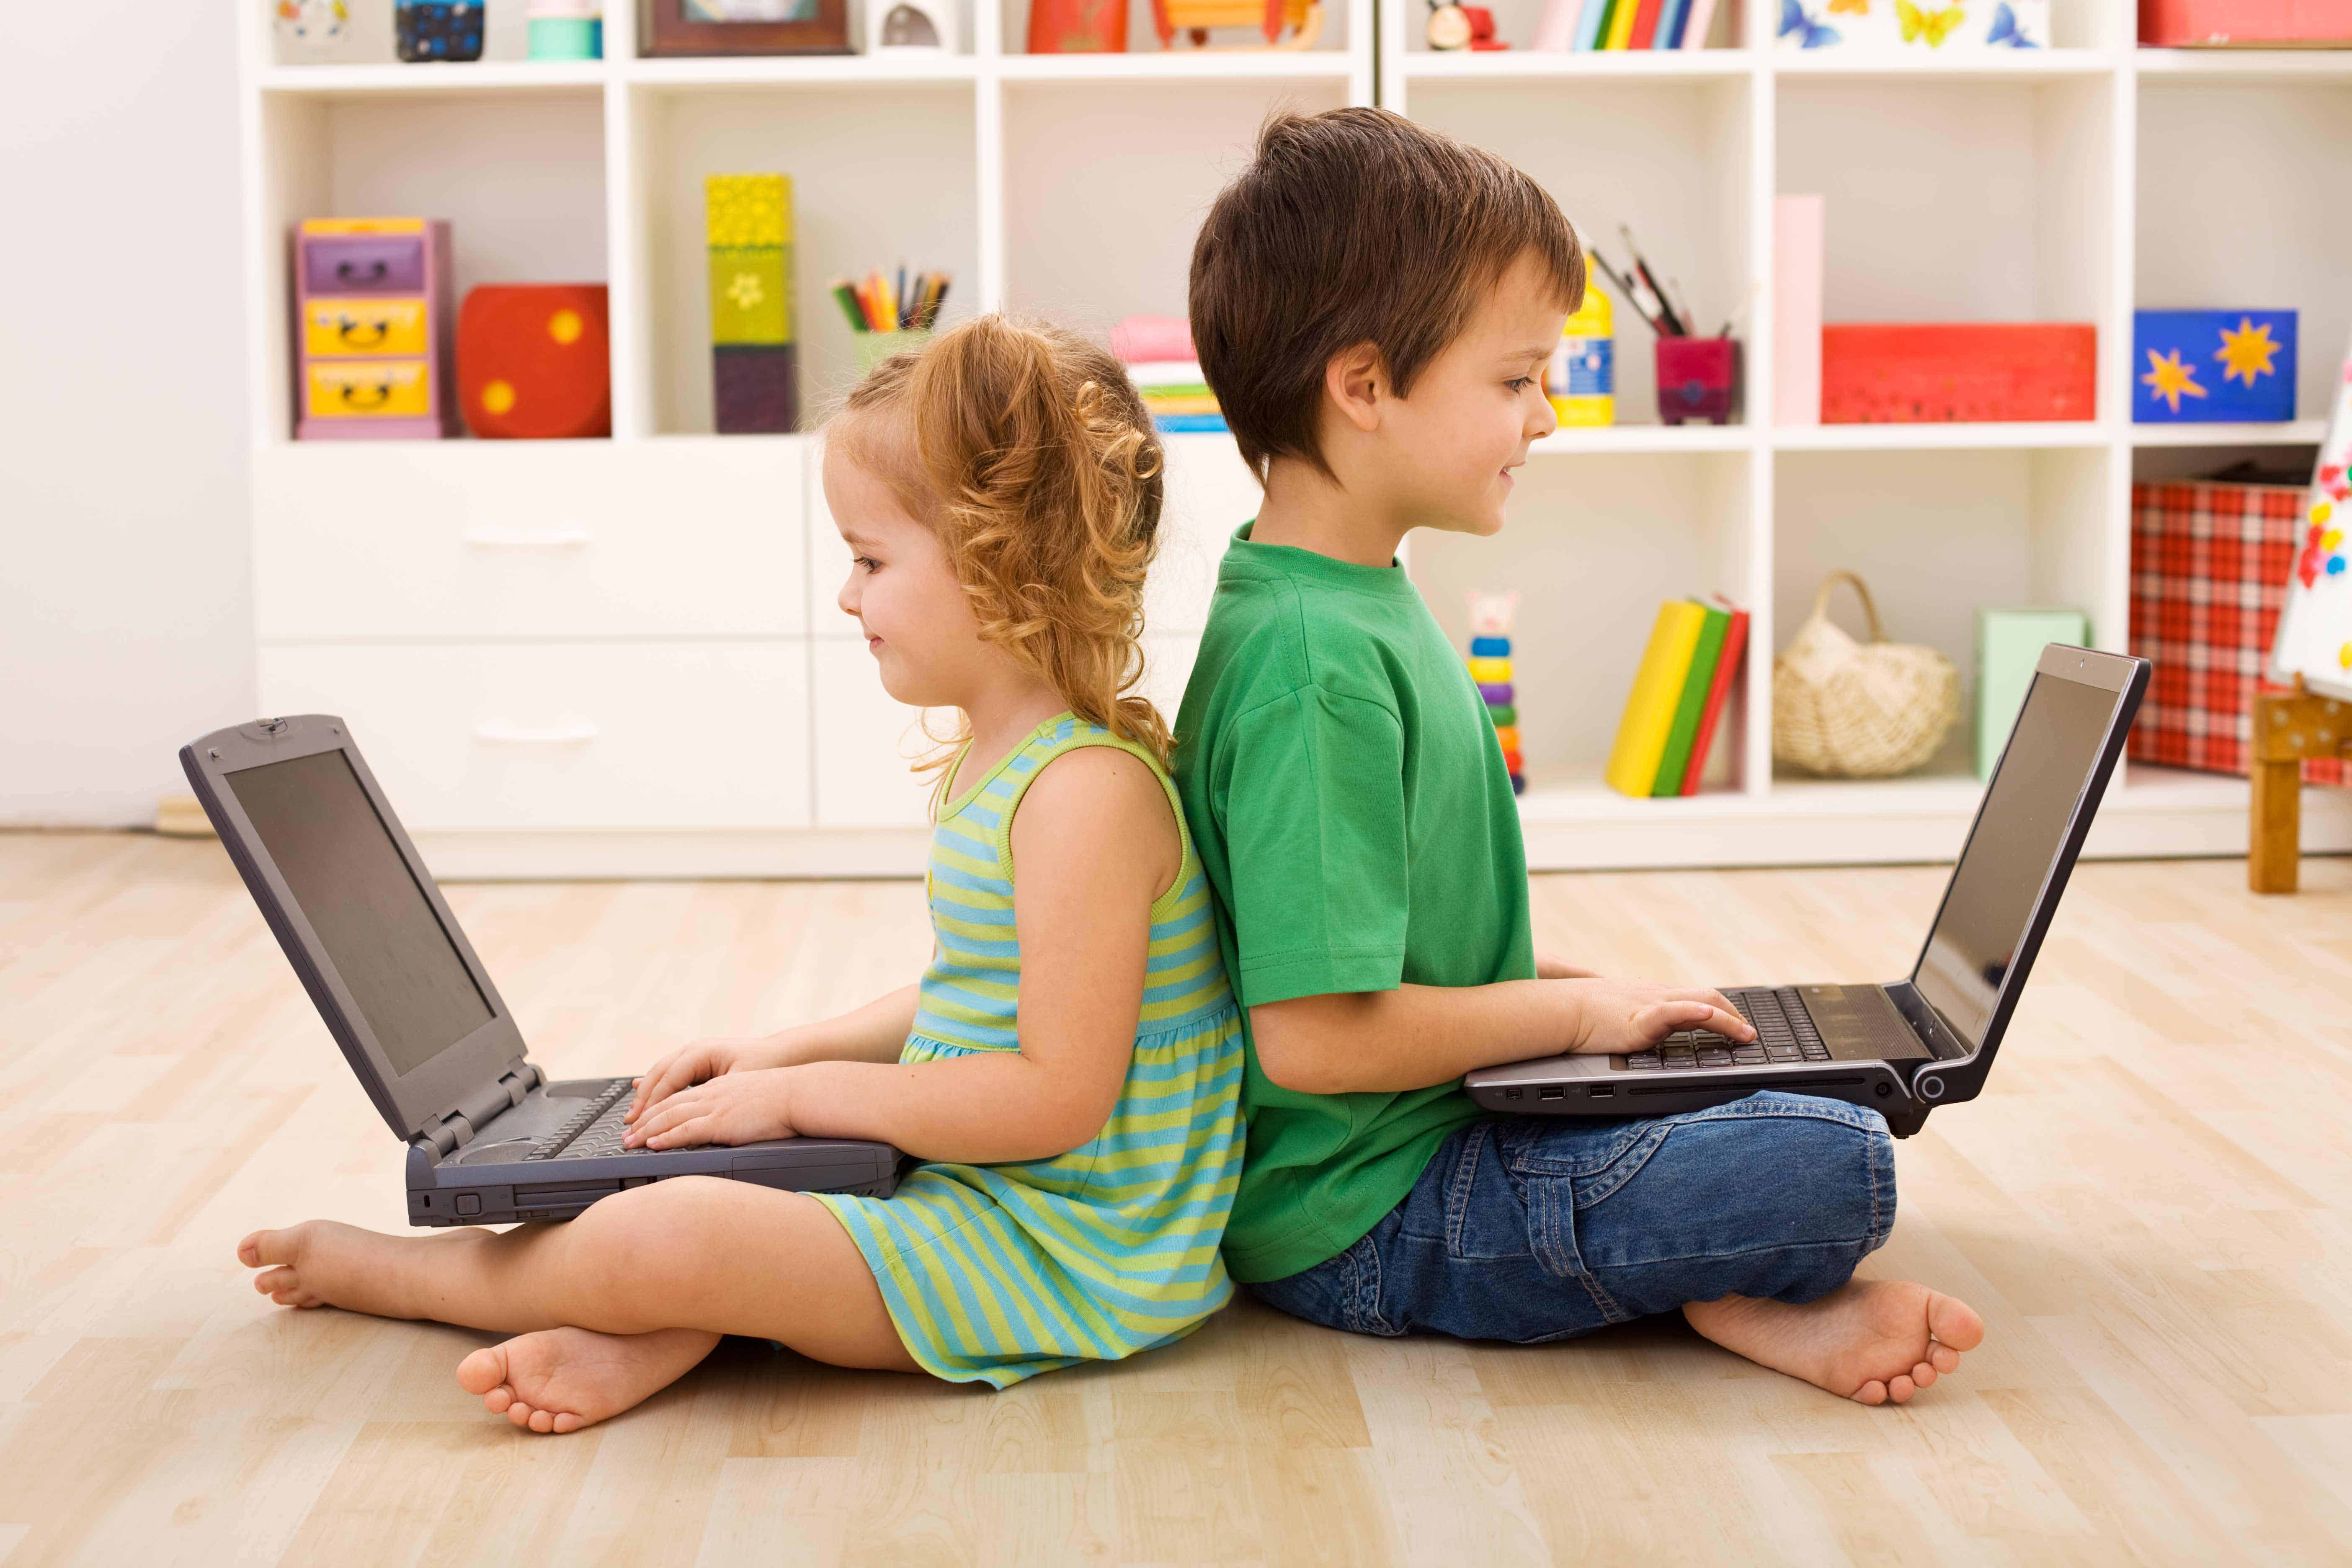 Warning: How to Keep Your Kids From Becoming Tech-Junkies